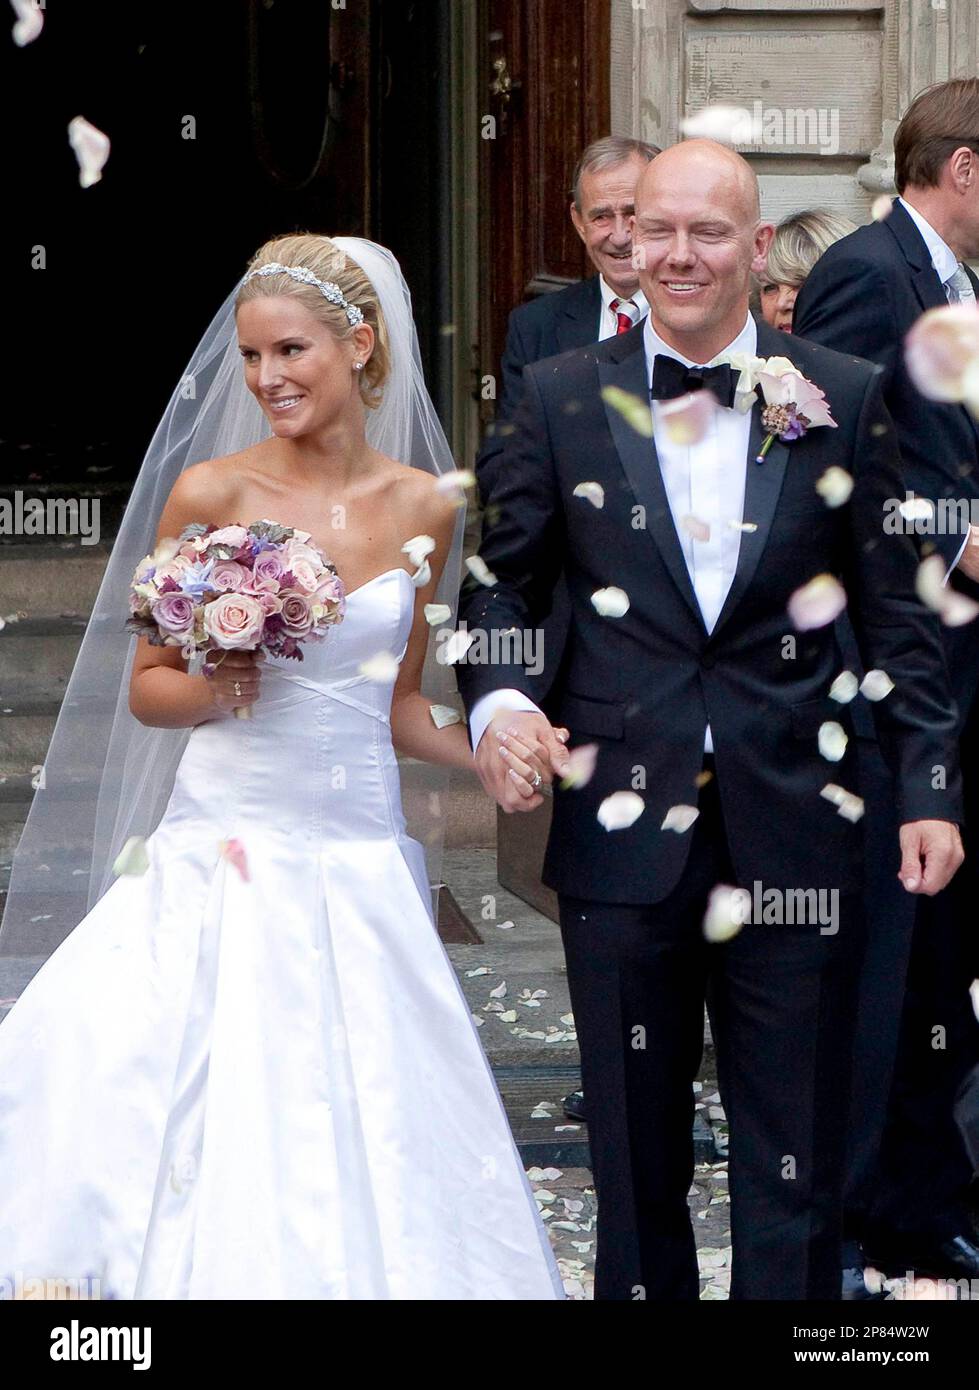 White rose petals are thrown into the air as ice hockey player Mats Sundin leaves the church of Maria Magdalena in central Stockholm, Saturday, Aug. 29, 2009, together with his bride Josephine Johansson. Sundin has played in the NHL for the last eighteen years and 1997 to 2008 he was the team captain of Toronto Maple Leafs. (AP Photo/Scanpix Sweden/Roger Vikstrom) ** SWEDEN OUT ** Stock Photo